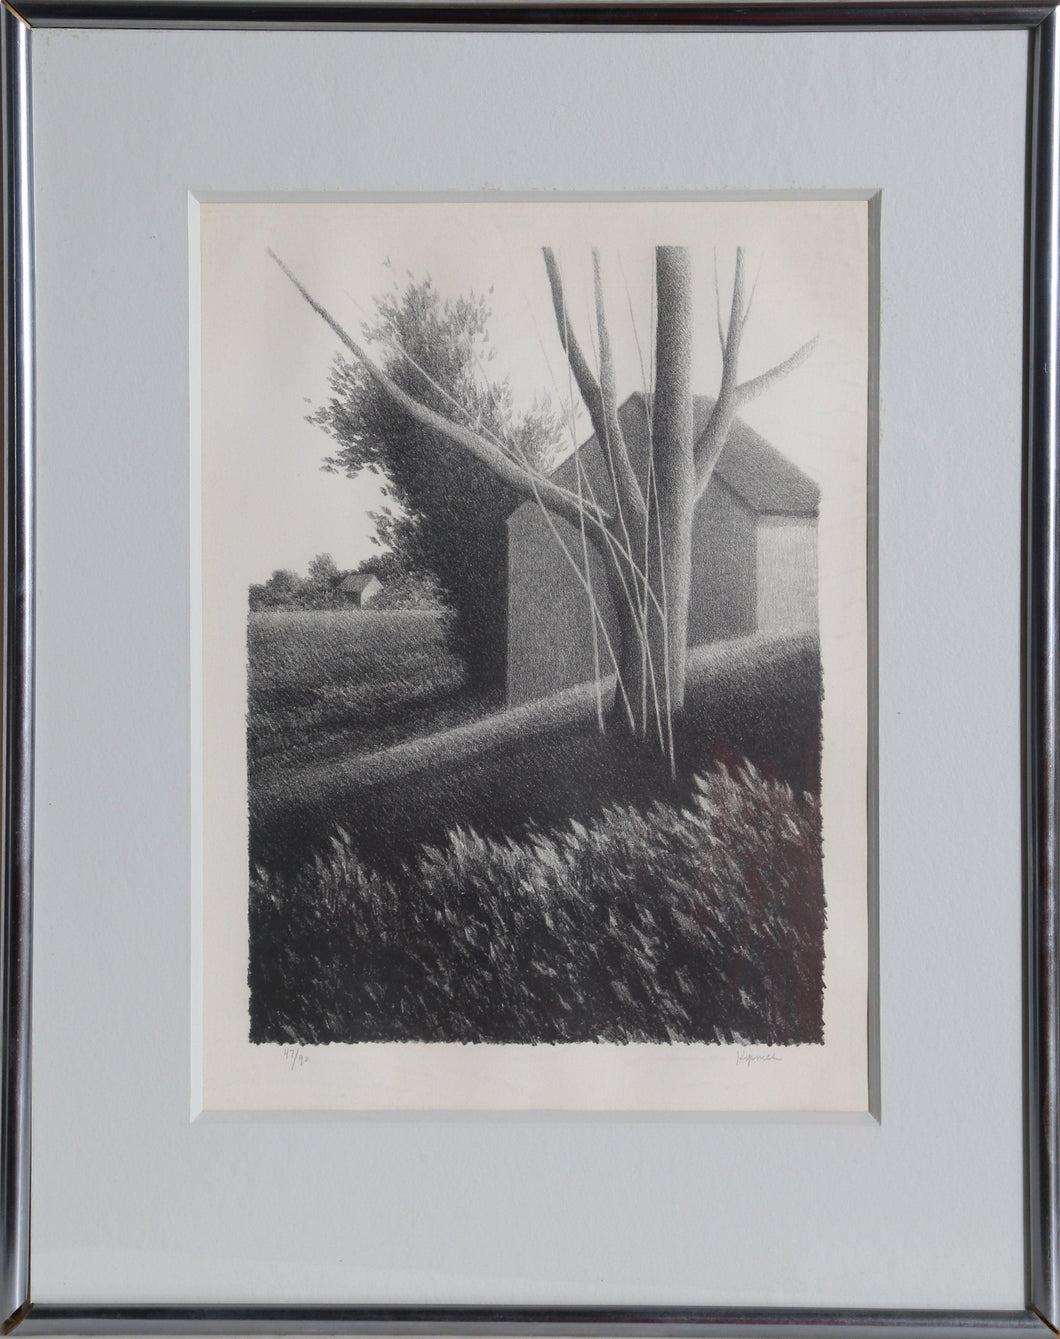 Shack with Tree in Front Lithograph | Robert Kipniss,{{product.type}}